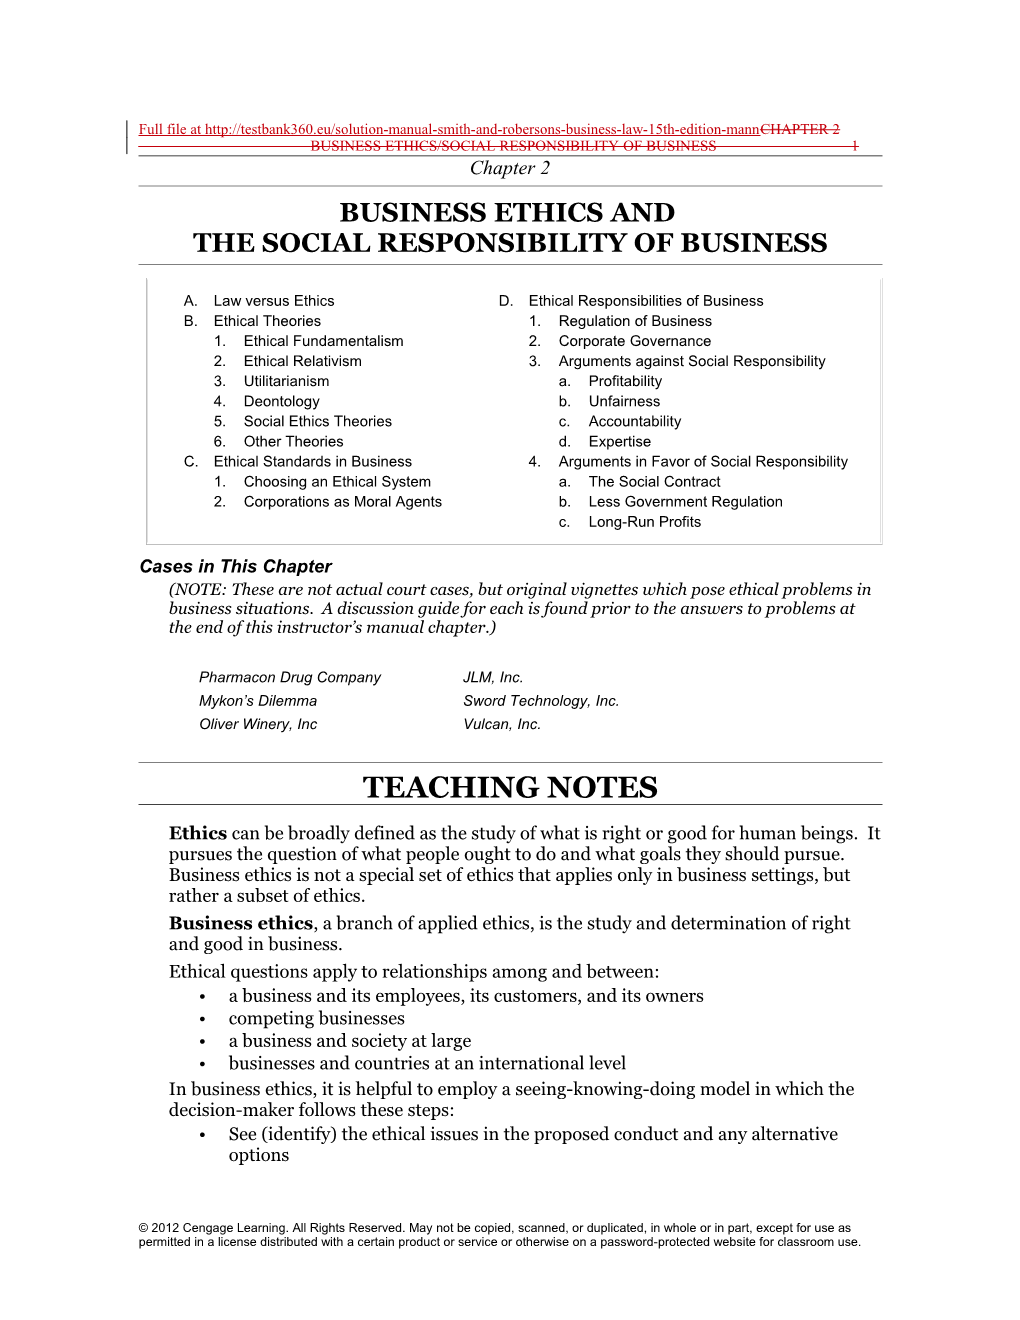 Full File at 2 BUSINESS ETHICS/SOCIAL RESPONSIBILITY of BUSINESS XXX